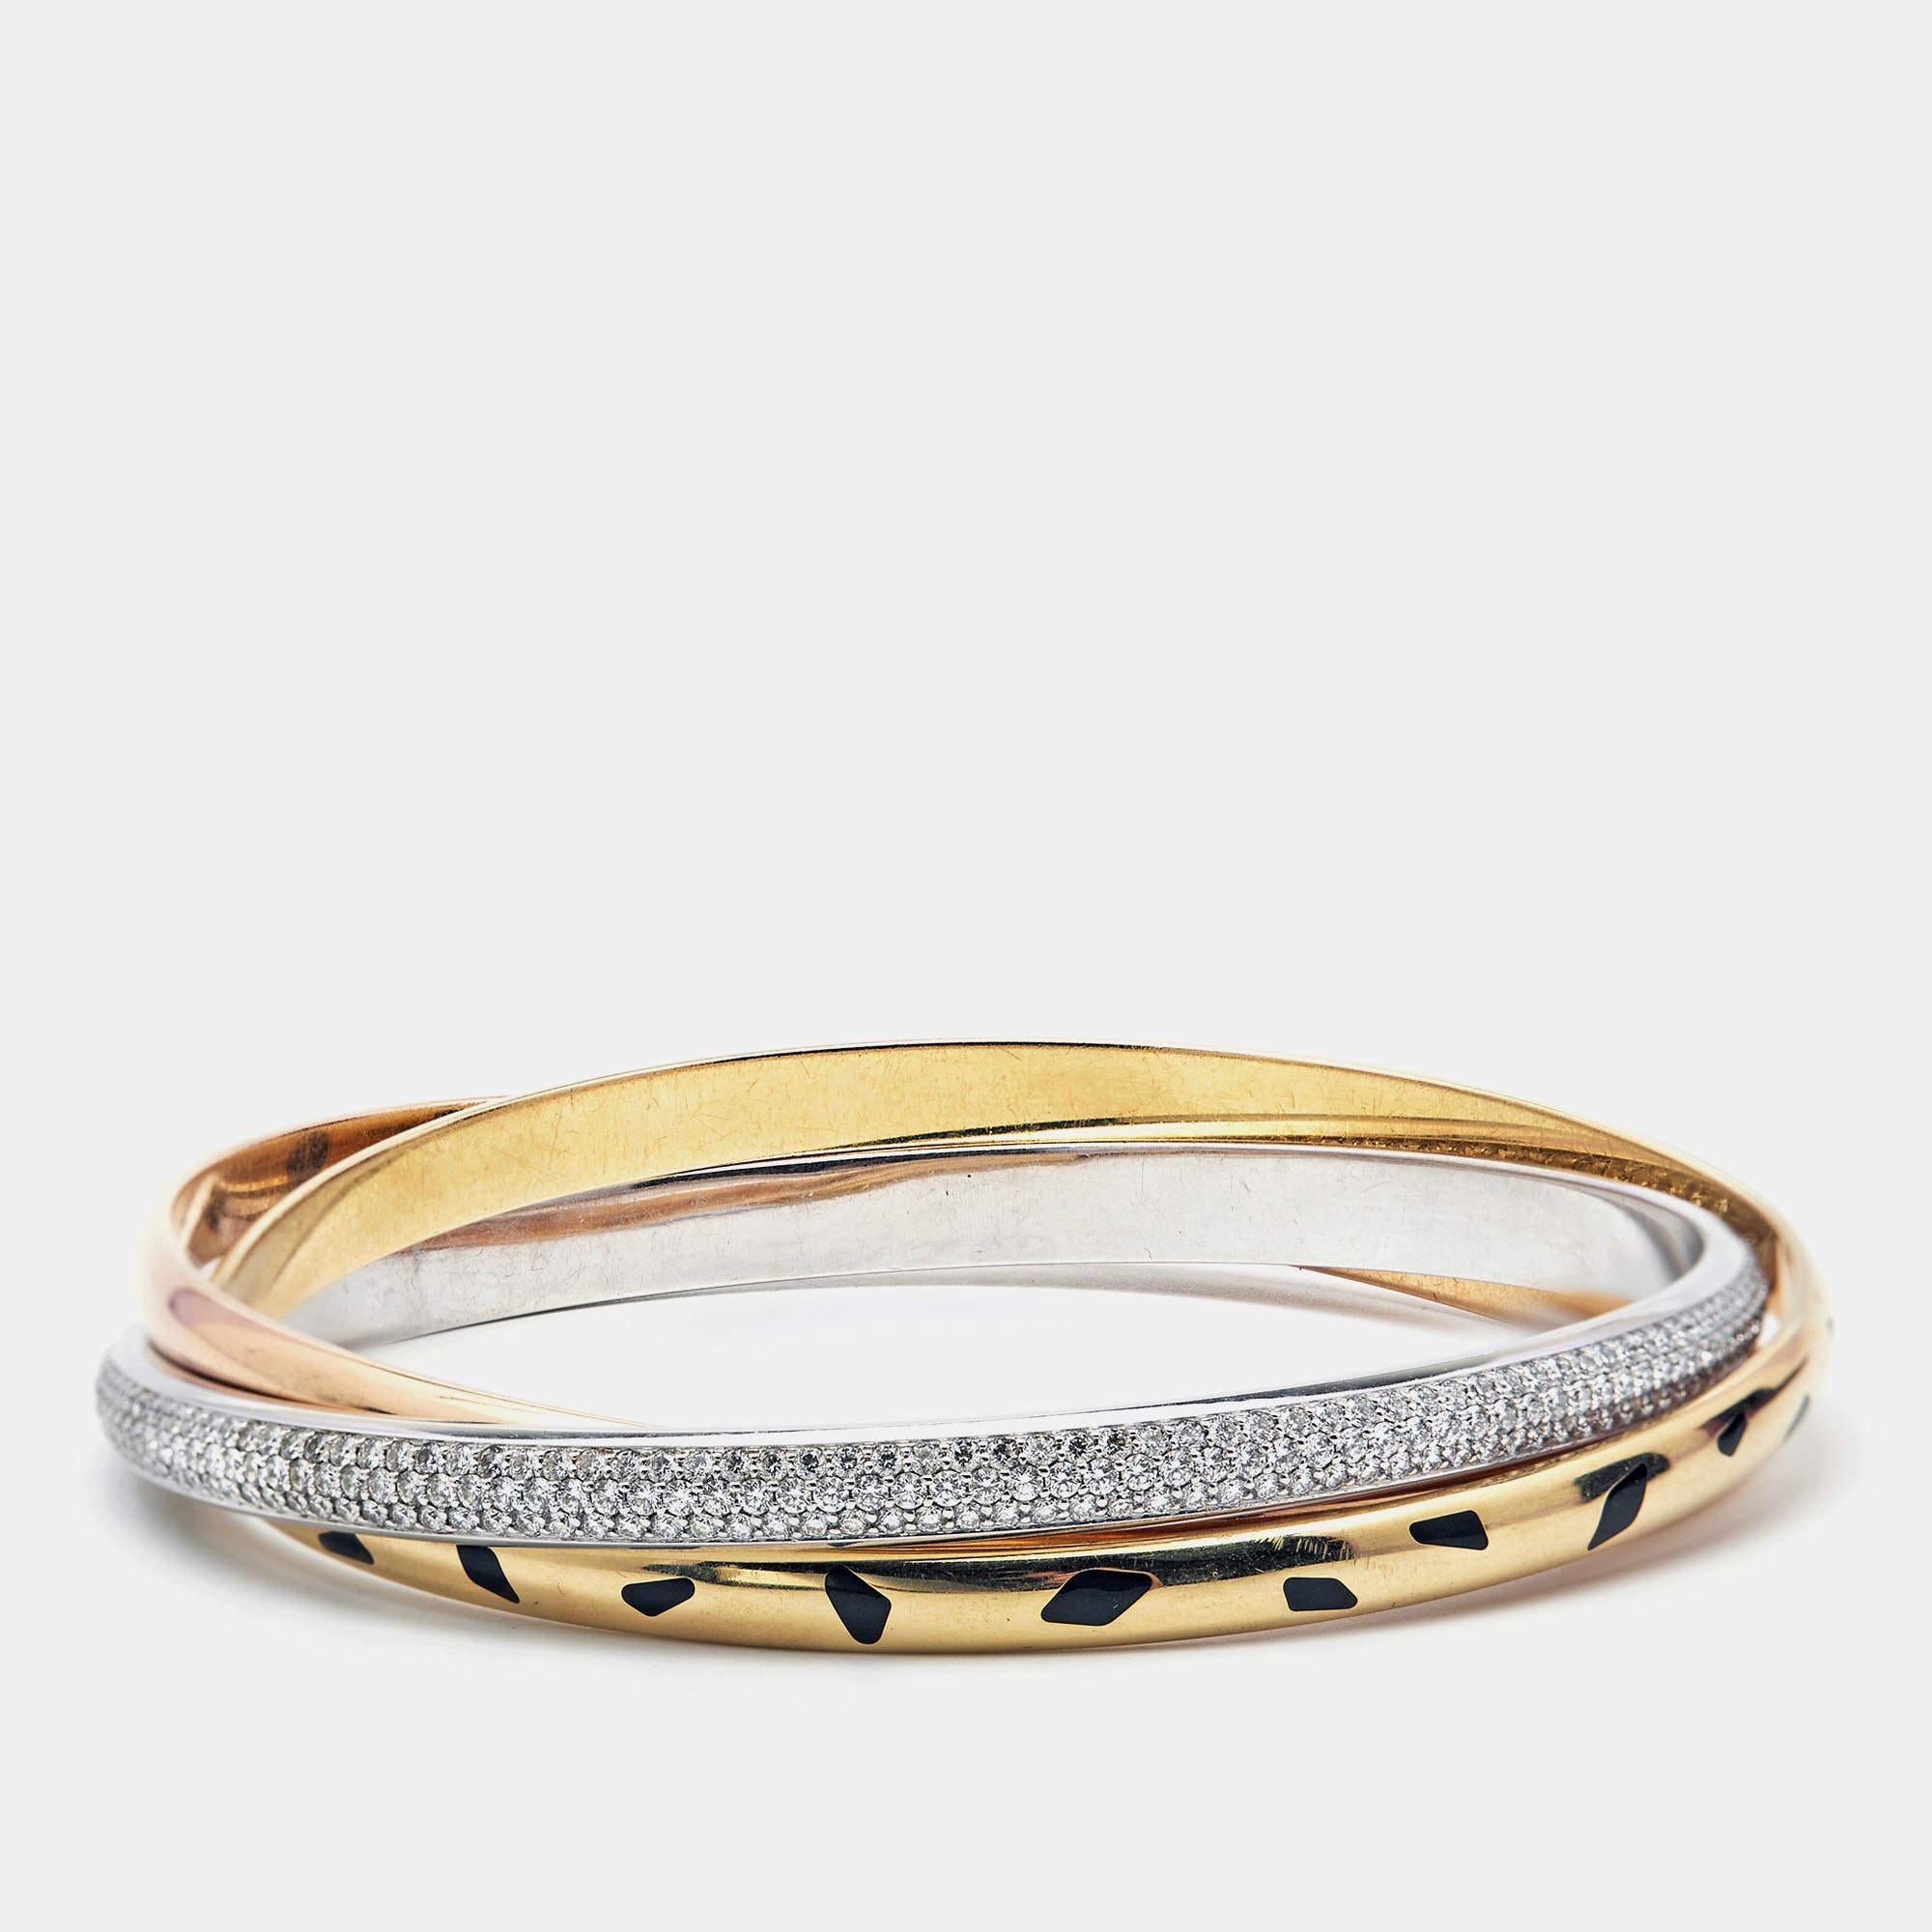 Cartier merged two of its most iconic collections, Trinity and Panthere, and the end result is one you will cherish forever. It is a very rare Cartier bracelet made of 18k rose, white, and yellow gold. The white gold bangle is decked with precious